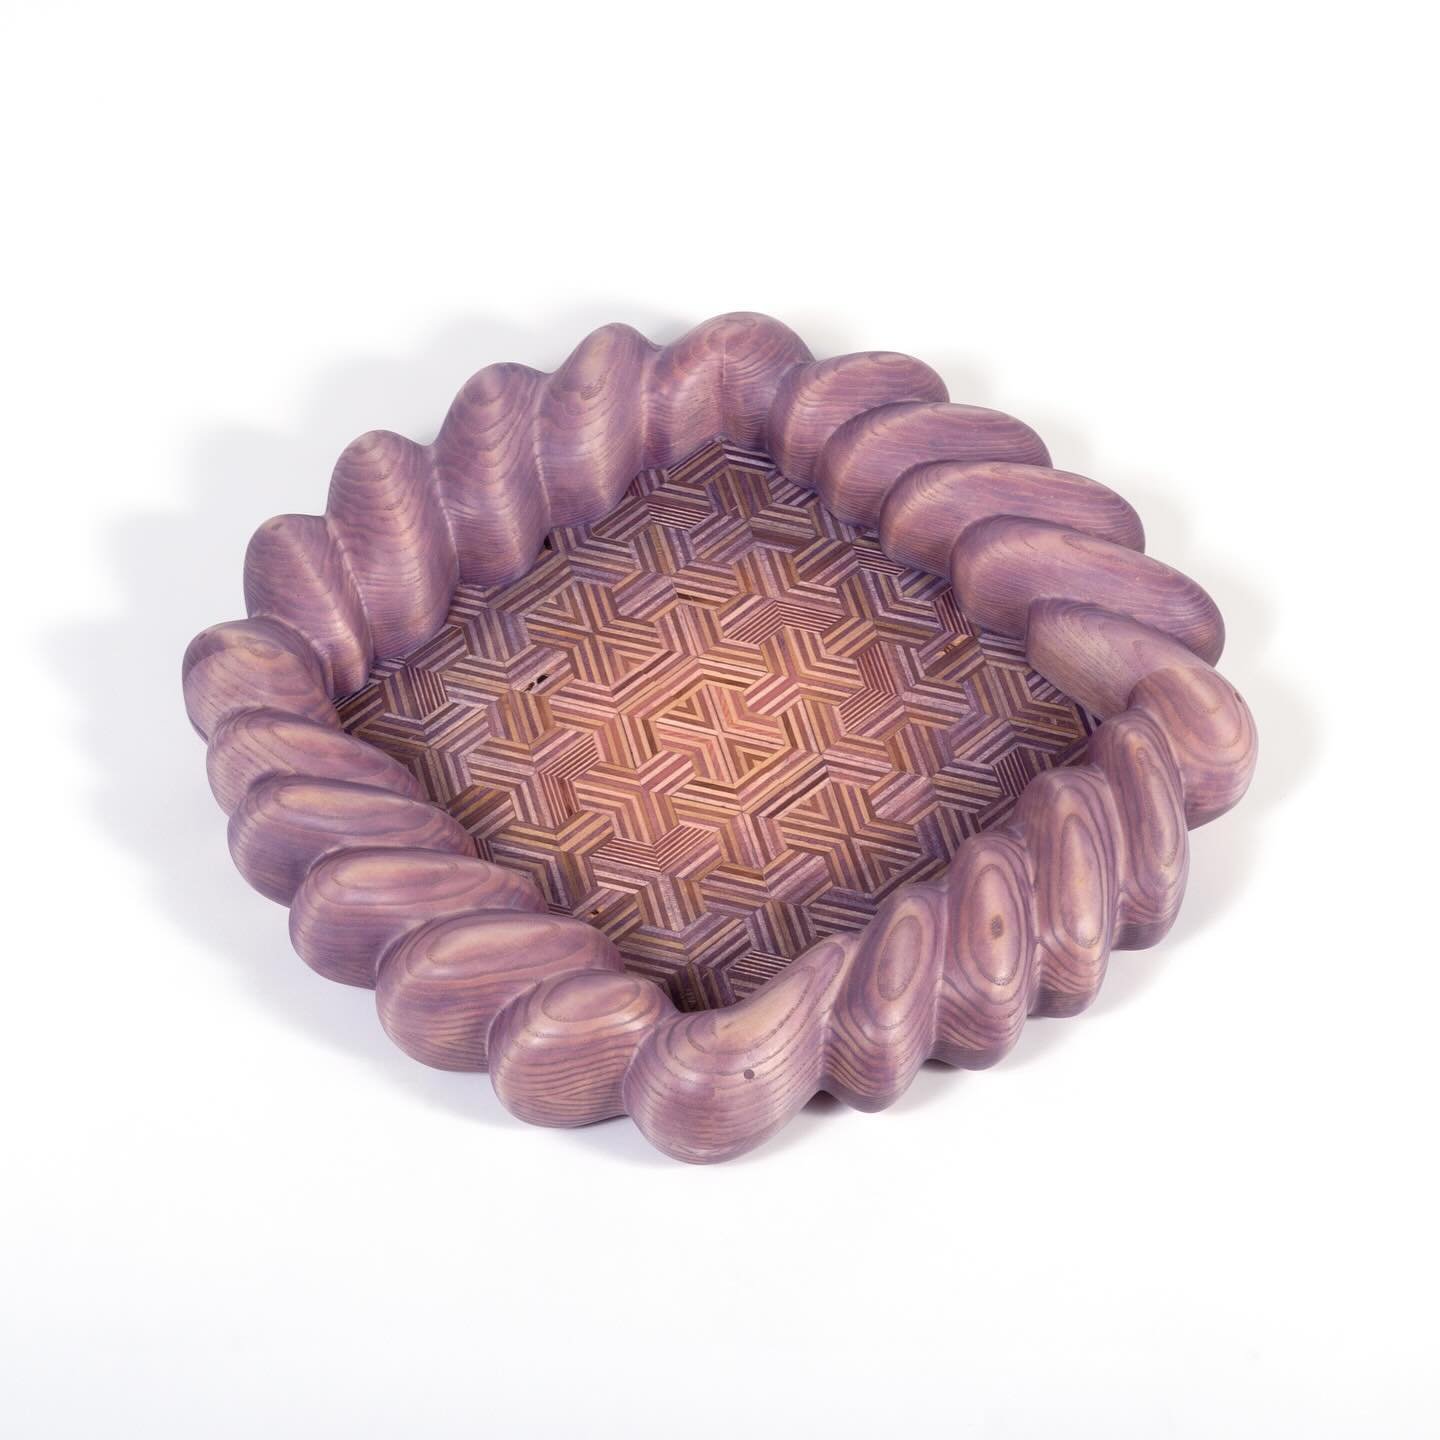 Trey Tray in lavender. 
Nerikomi wood base with carved solid wood and hand dyed finish. 

#treyjonesstudio #nerikomiwood #tray #collectibledesign #americanartistry #craftinamerica #contemporarycraft